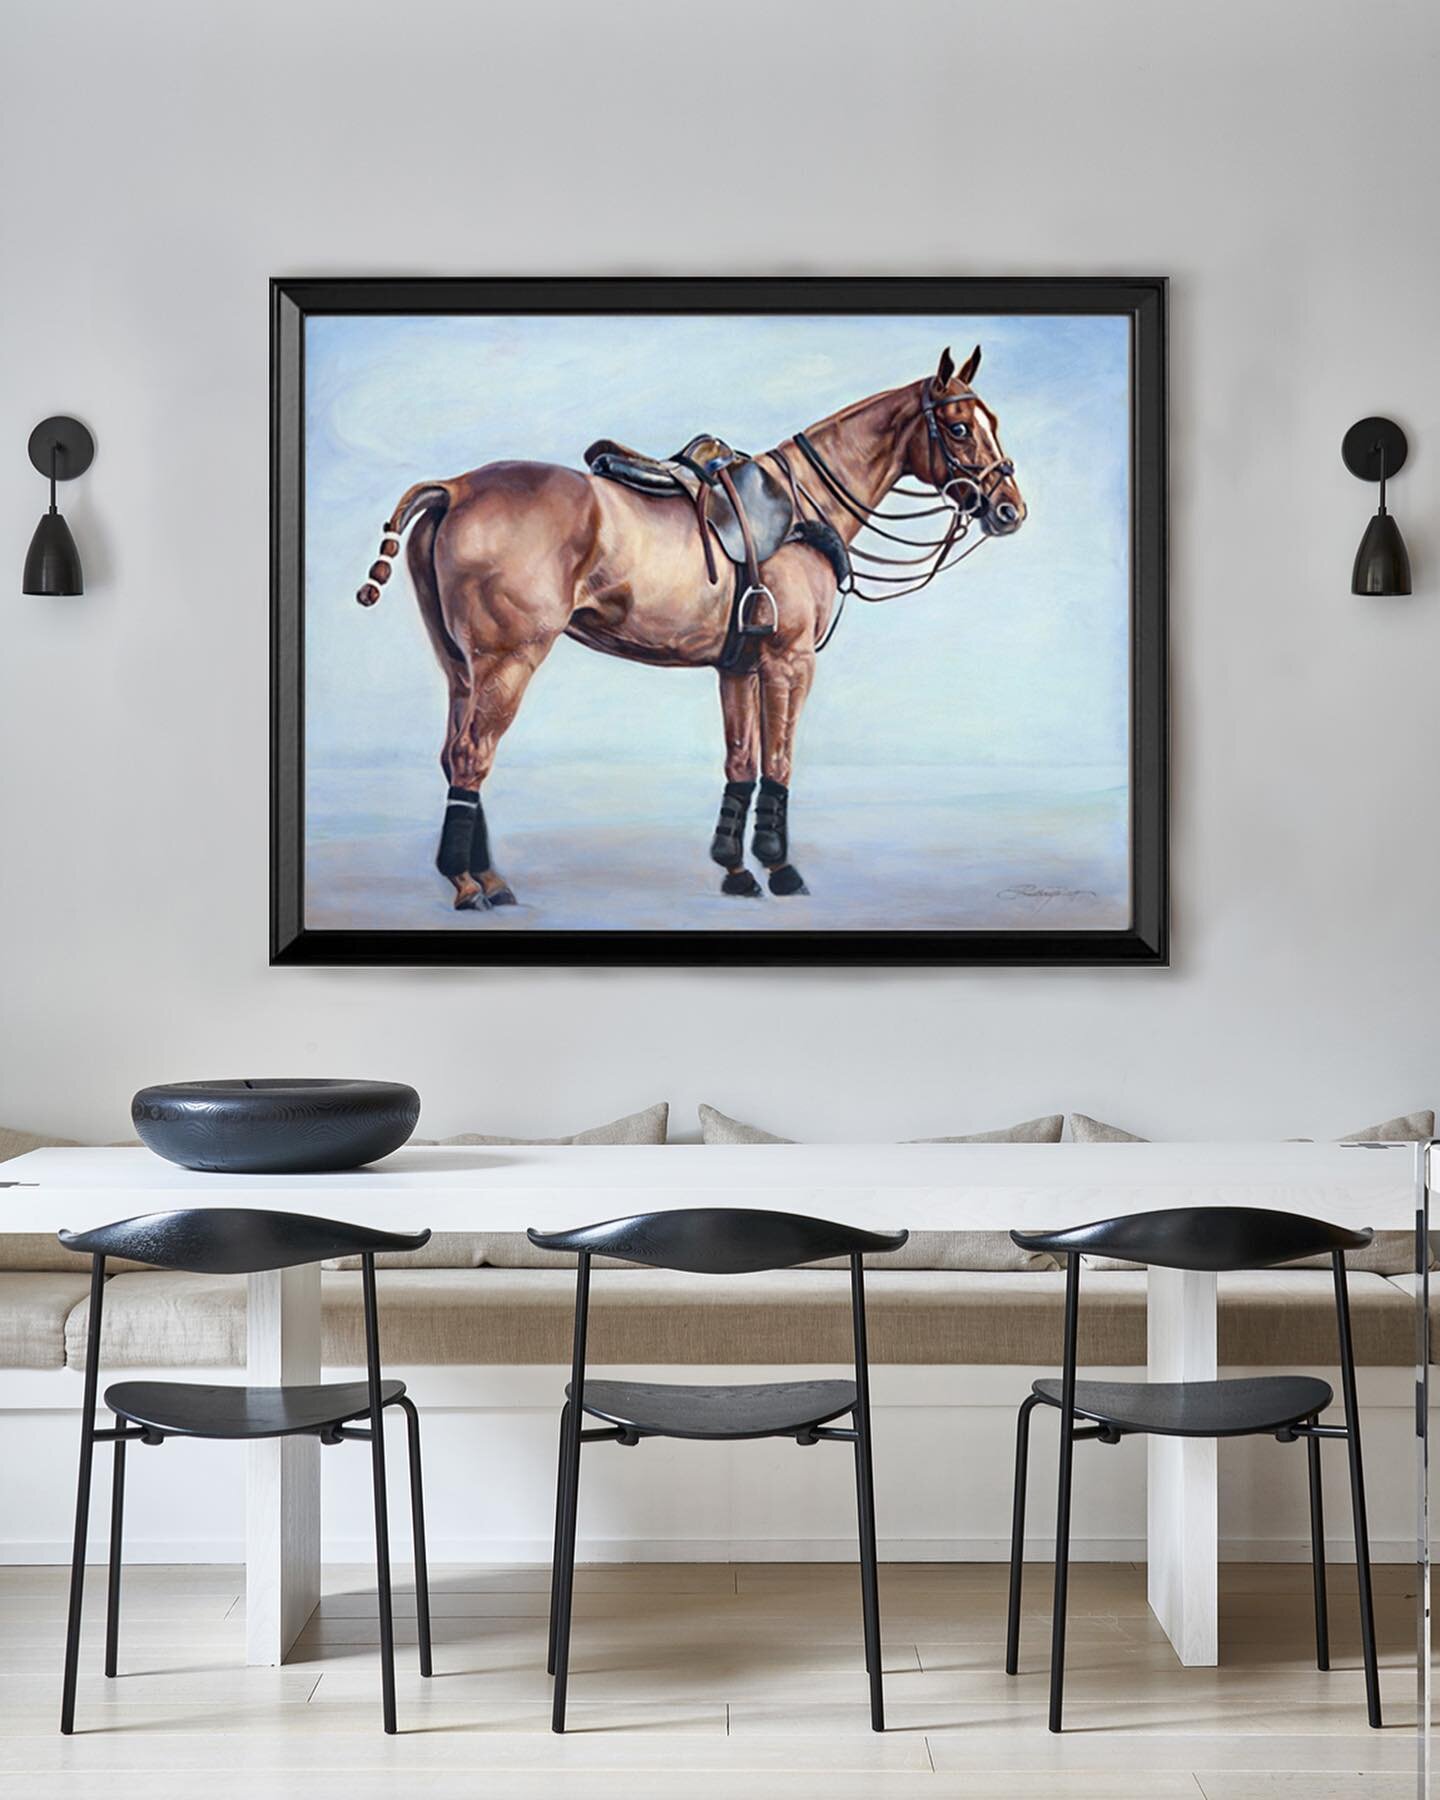 &ldquo;The Stance&rdquo; // oil on panel // 3&rsquo; x 4&rsquo; // original available // limited series of prints available. DM for details 
.
.
#equineart #horseart #artistsofinstagram #instaart #equinepainting #equijeportrait #equestrianlife #eques